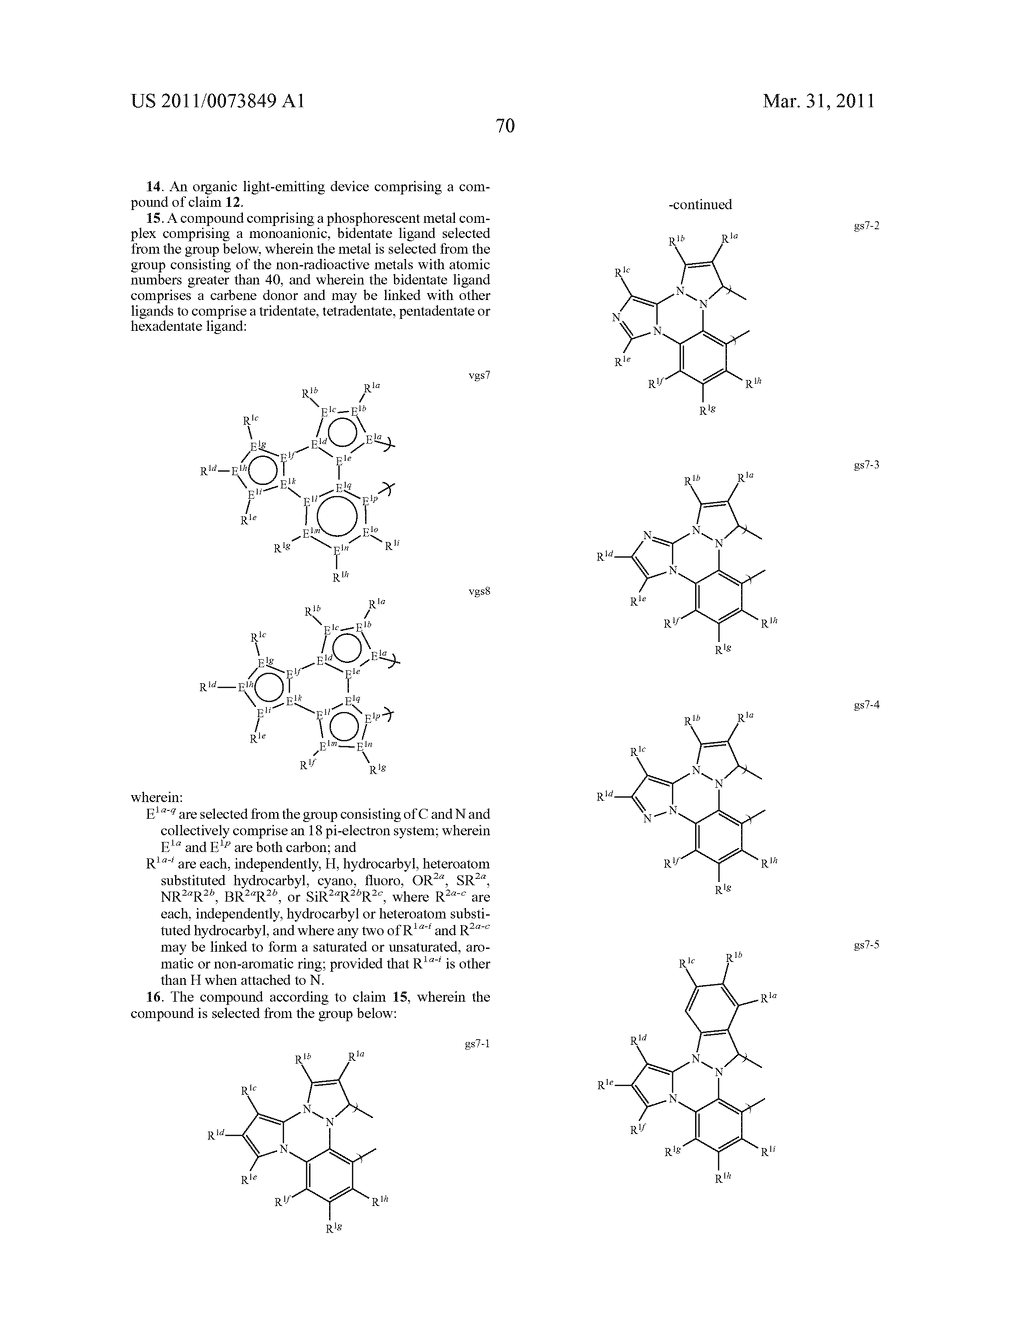 METAL COMPLEXES OF CYCLOMETALLATED IMIDAZO[1,2-f ]PHENANTHRIDINE AND DIIMIDAZO[1,2-a:1',2'-c ]QUNIAZOLINE LIGANDS AND ISOELECTRONIC AND BENZANNULATED ANALOGS THEREOF - diagram, schematic, and image 86